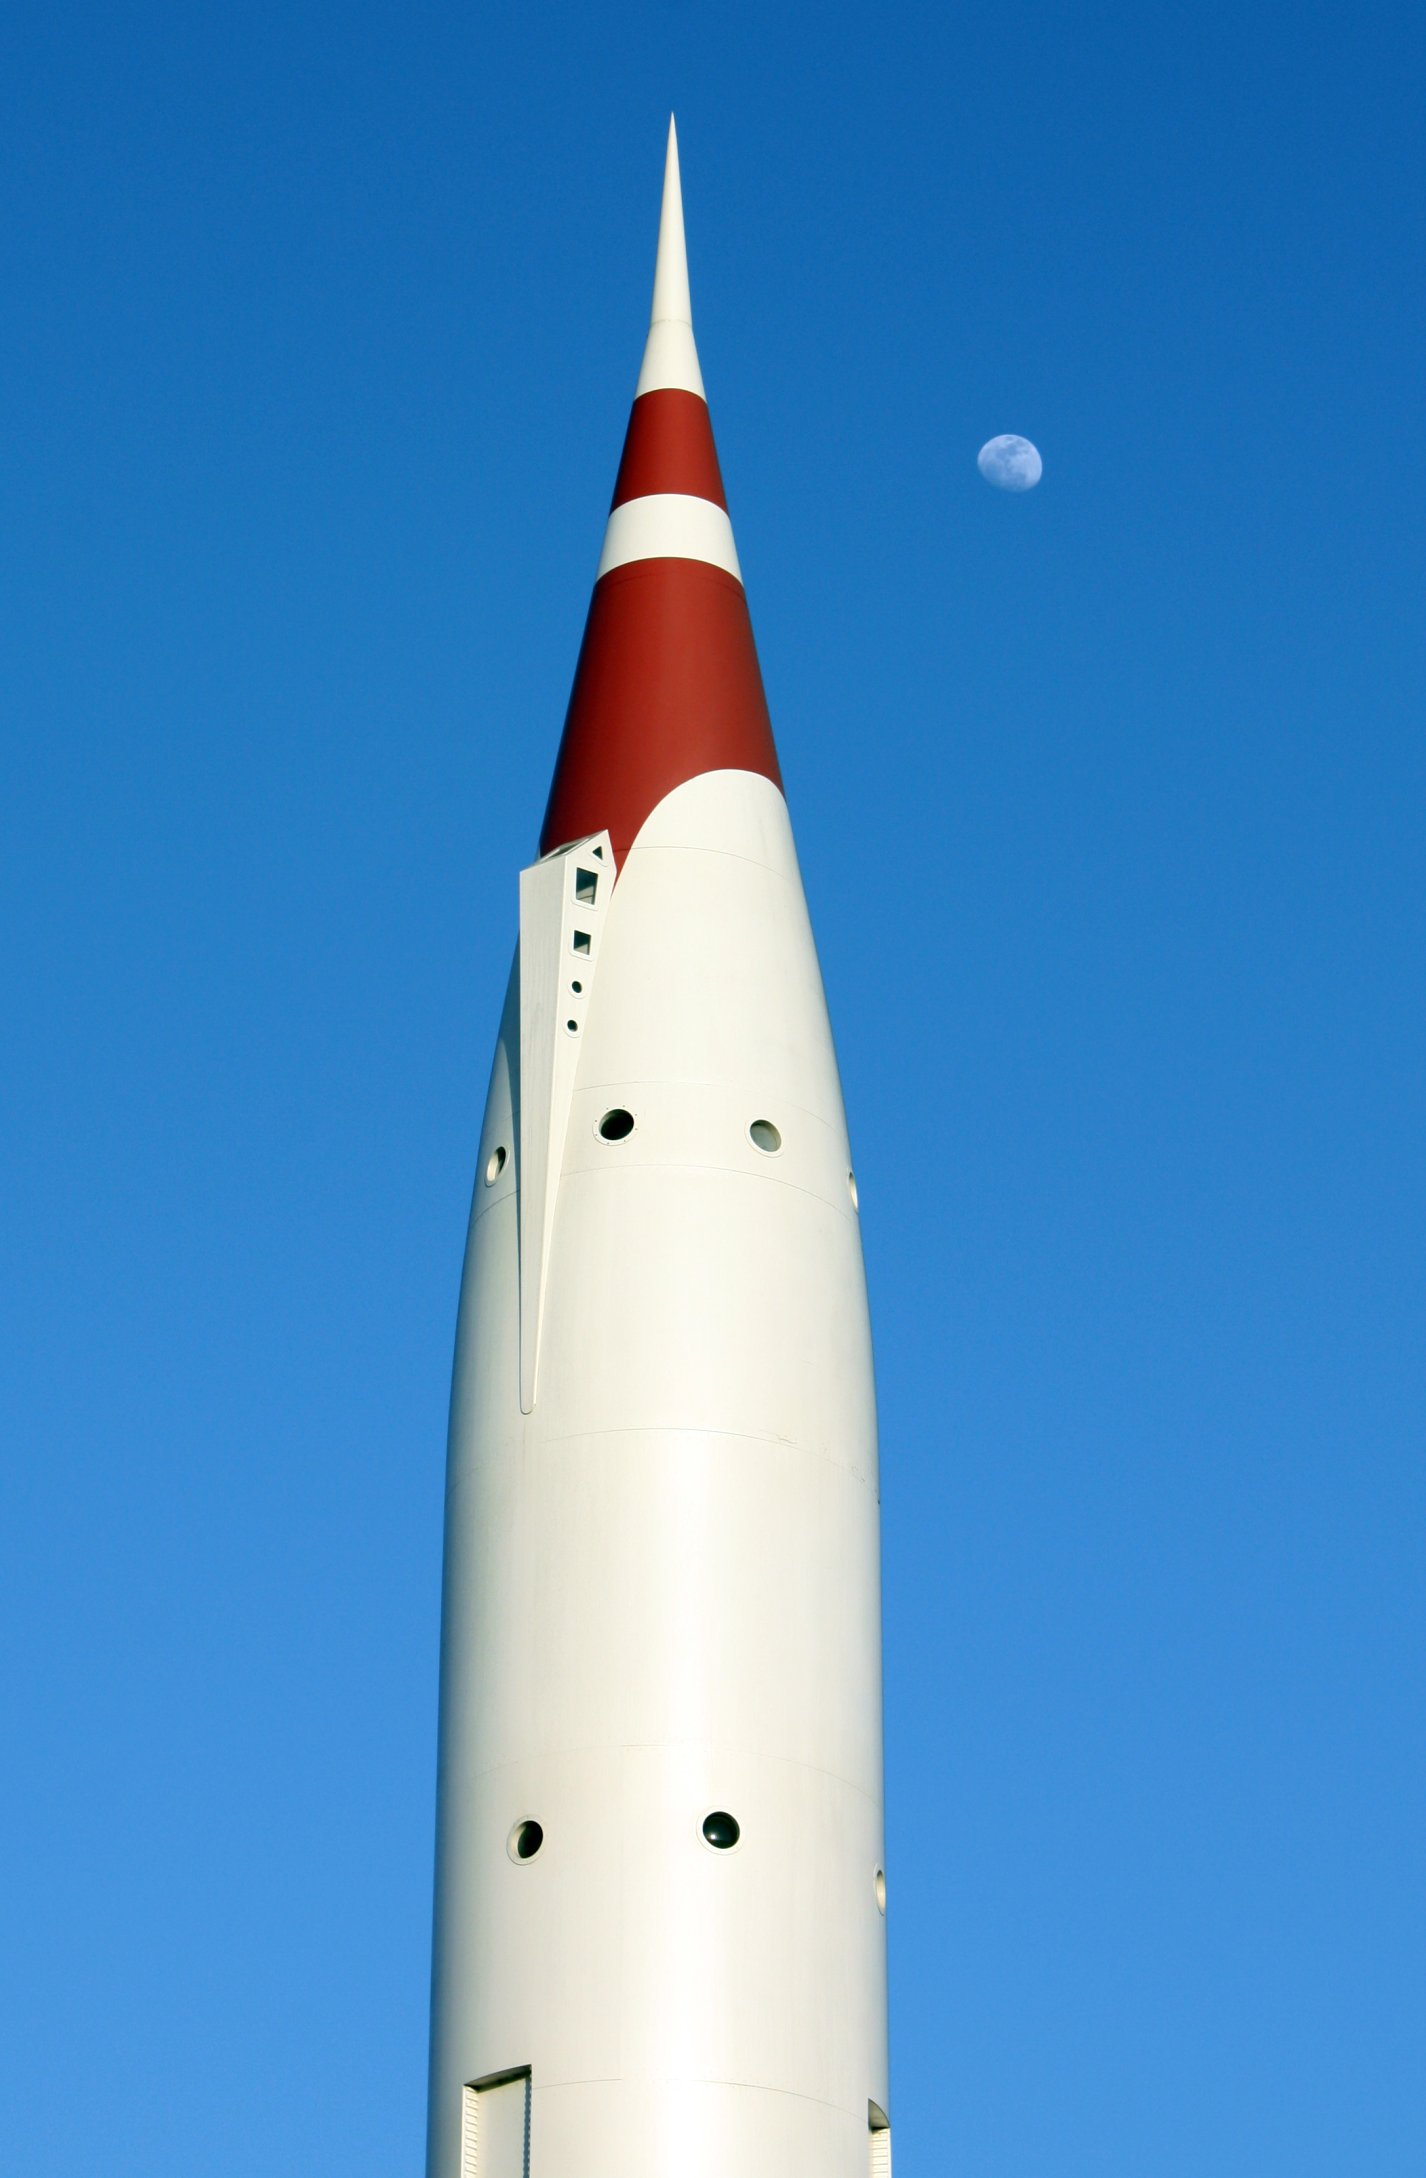 a large white and red jet flying through a blue sky